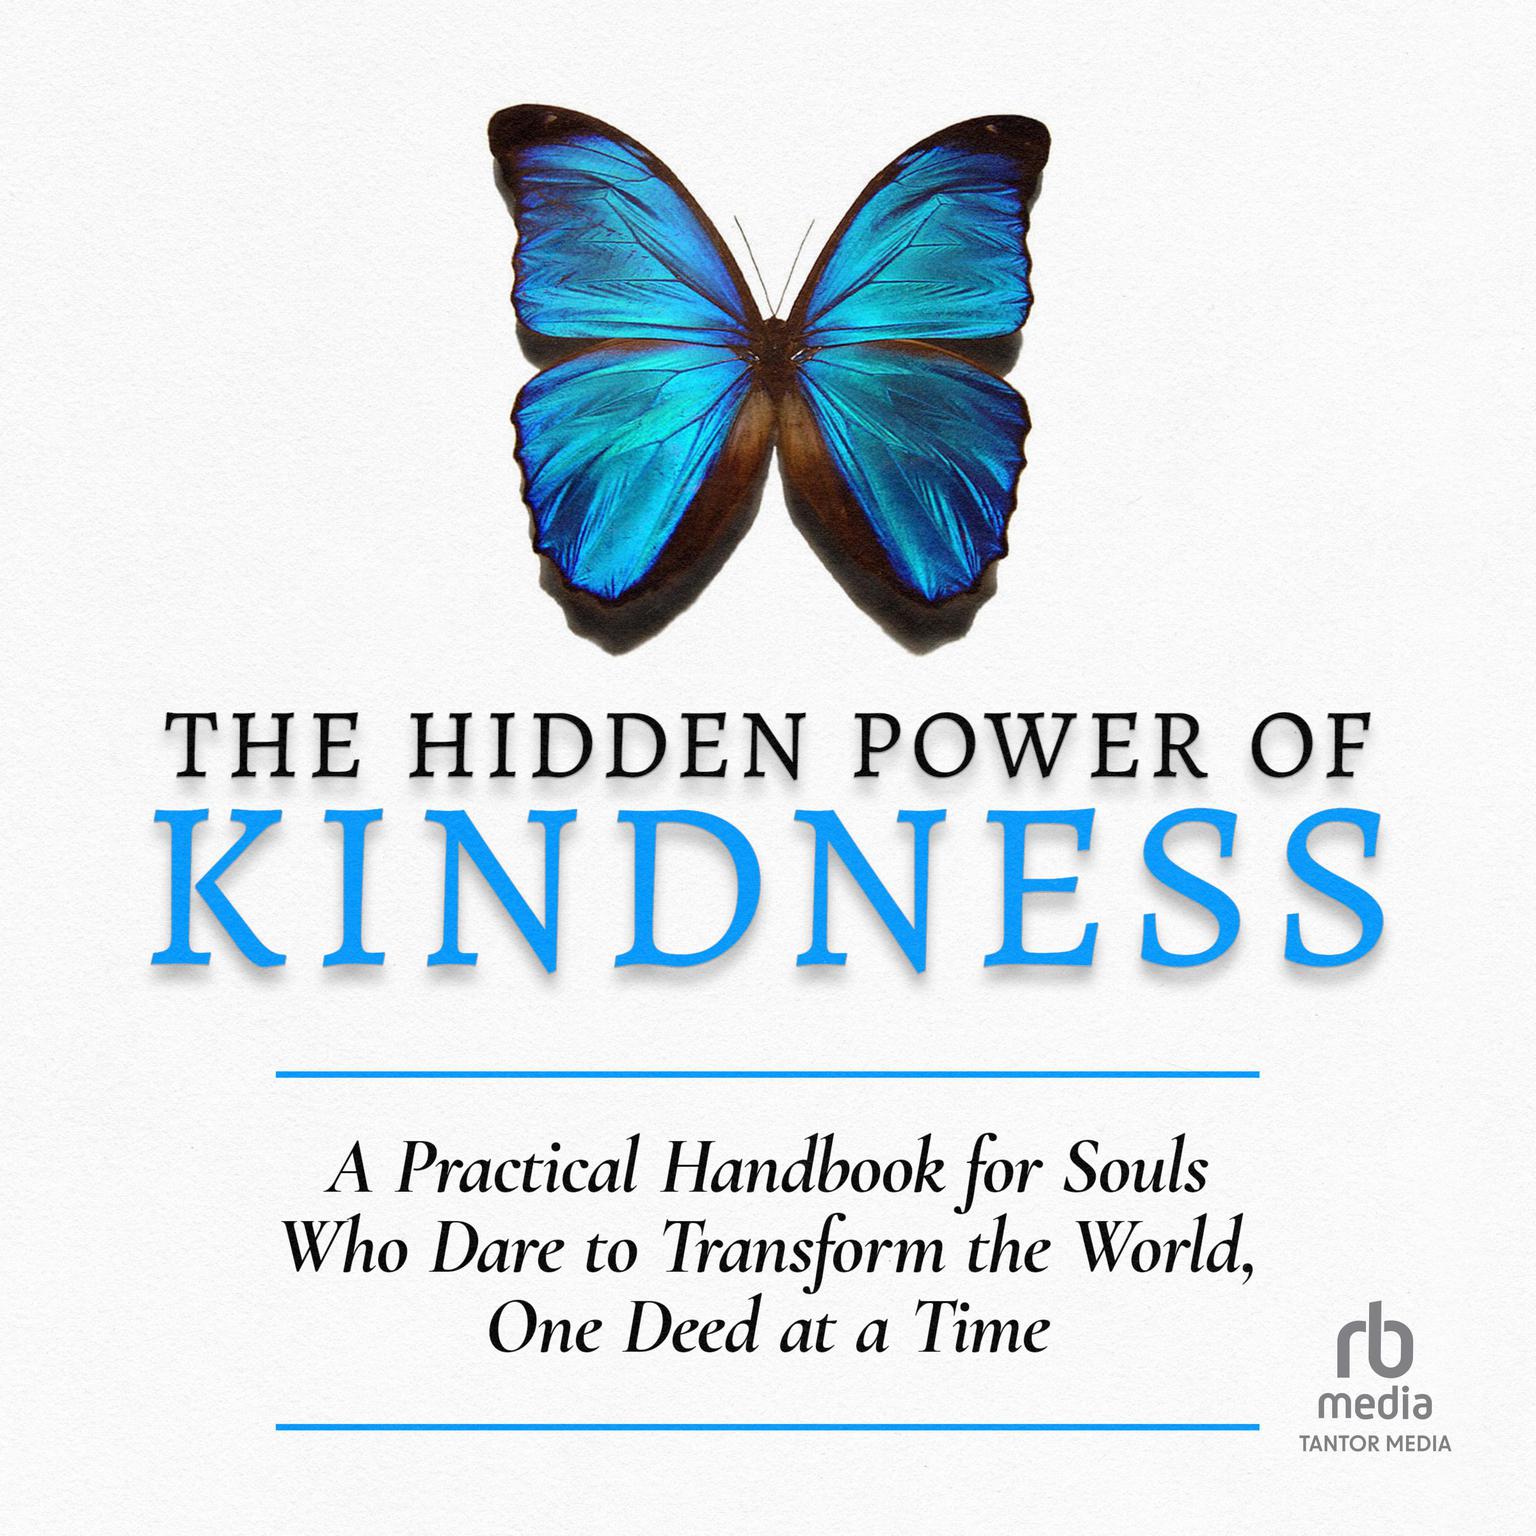 The Hidden Power of Kindness: A Practical Handbook for Souls Who Dare to Transform the World, One Deed at a Time Audiobook, by Lawrence G. Lovasik